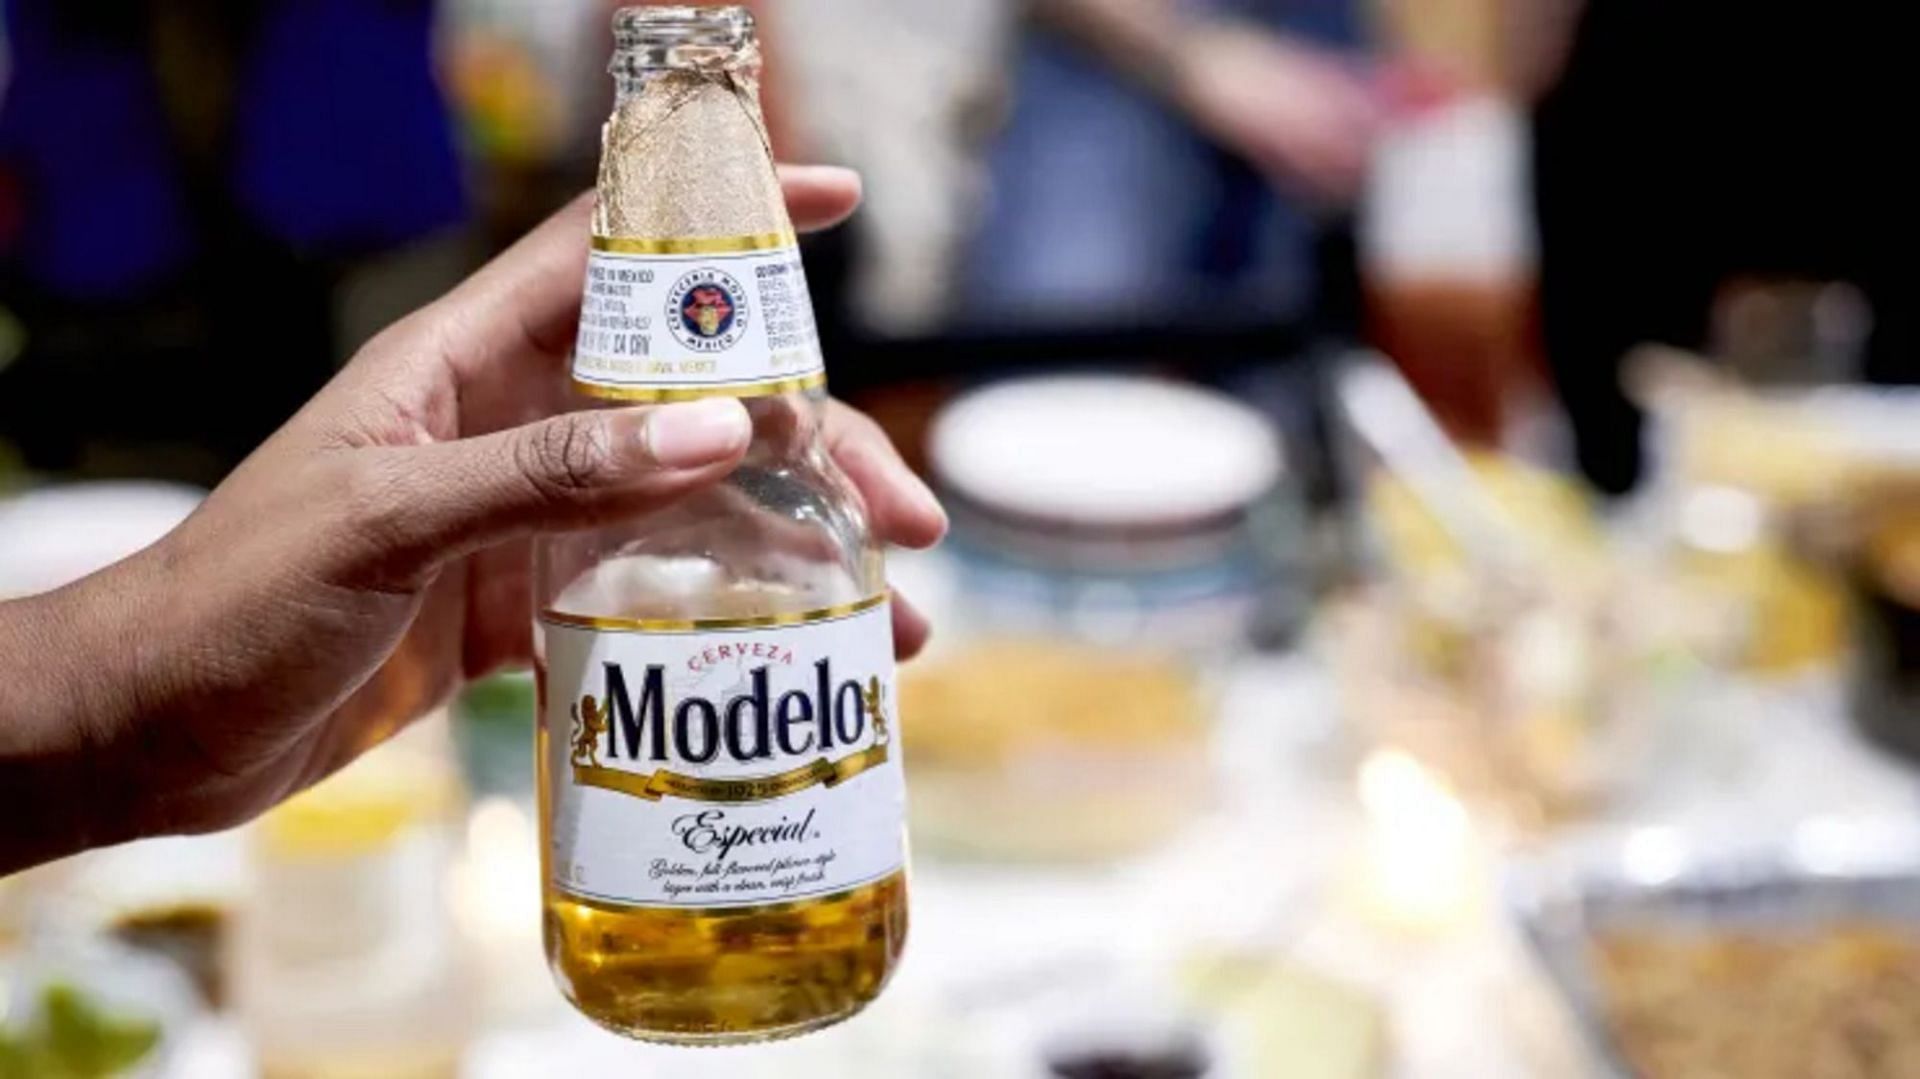 Modelo Especial becomes top selling beer in the US following Bud Light controversy (Image via Getty Images)